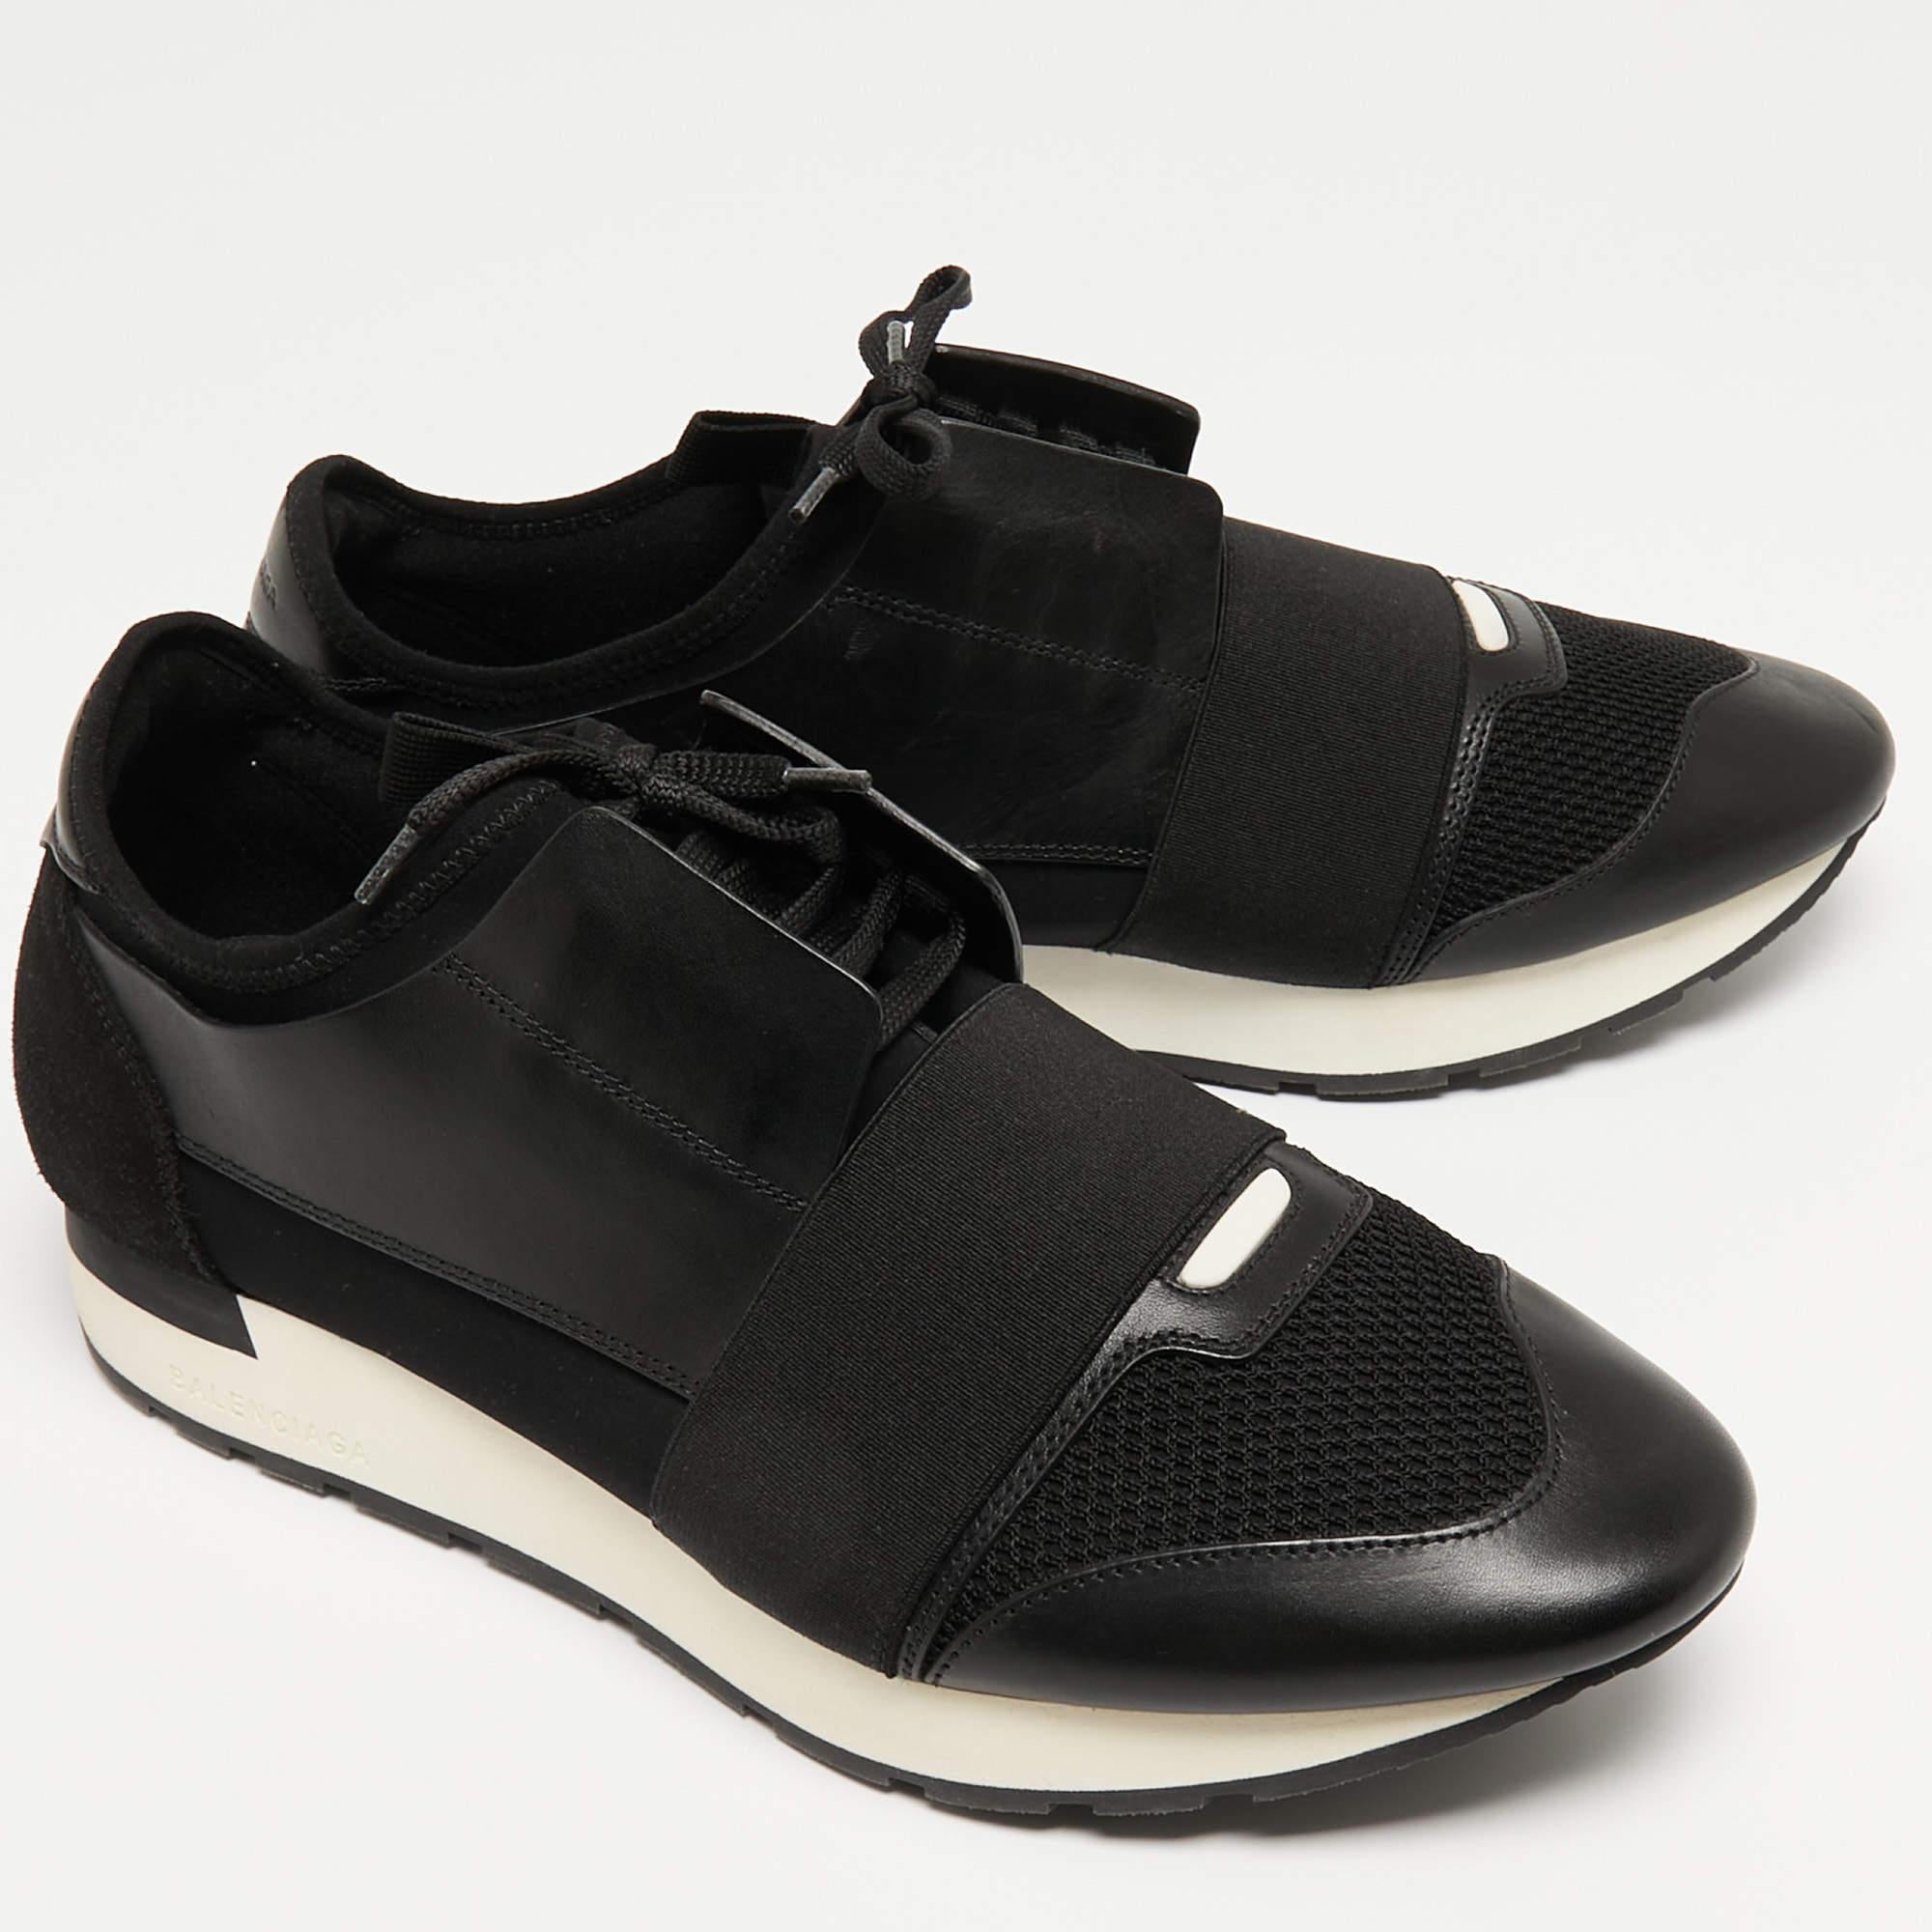 Let your latest shoe addition be this pair of Race Runners sneakers from Balenciaga. These black sneakers have been crafted from leather and fabric and feature a chic silhouette. They flaunt covered toes, strap detailing on the vamps, and tie-up